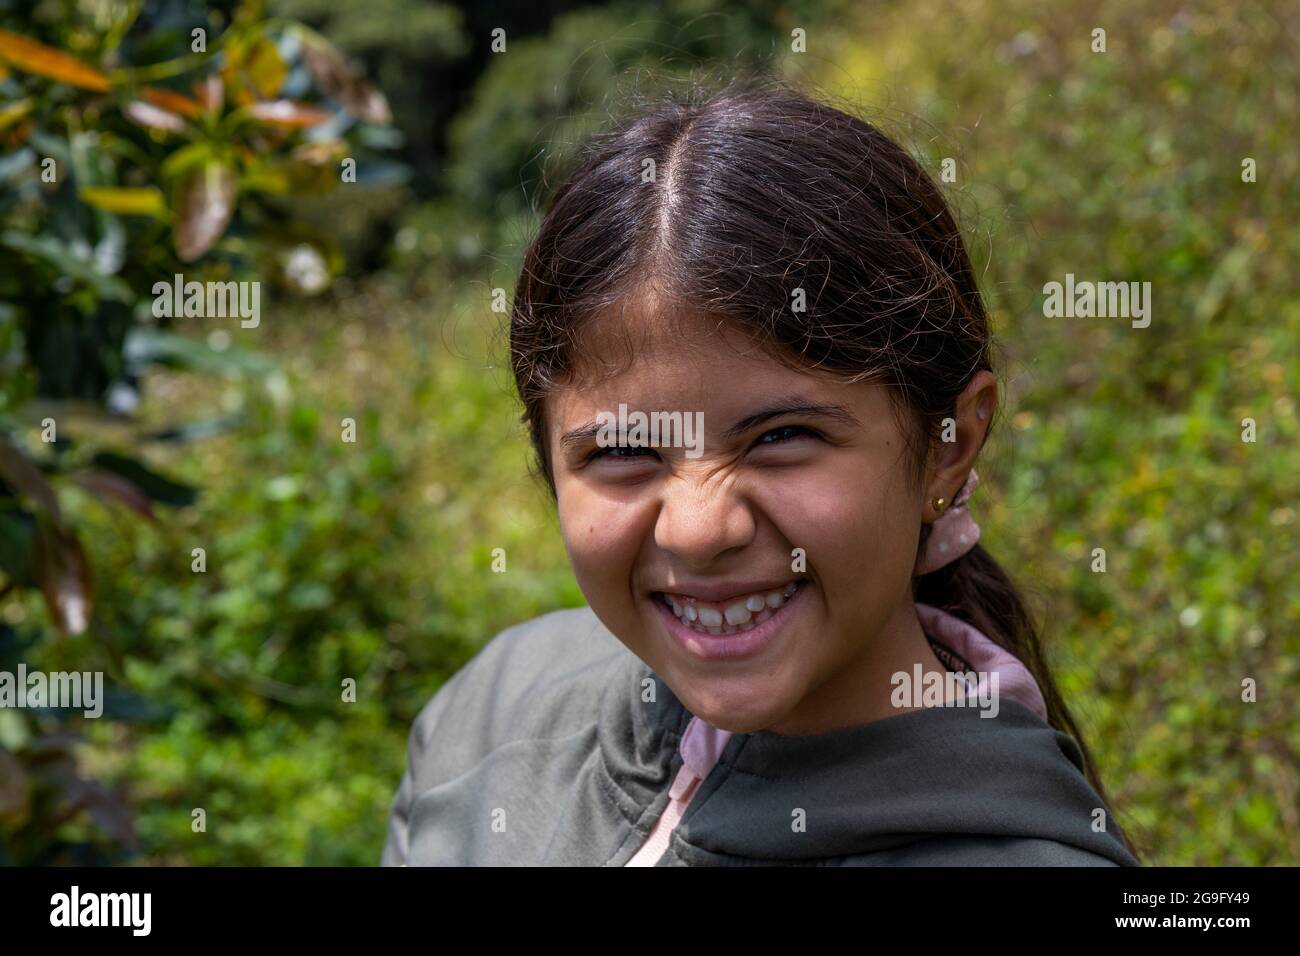 hispanic girl smiling in the country side Stock Photo